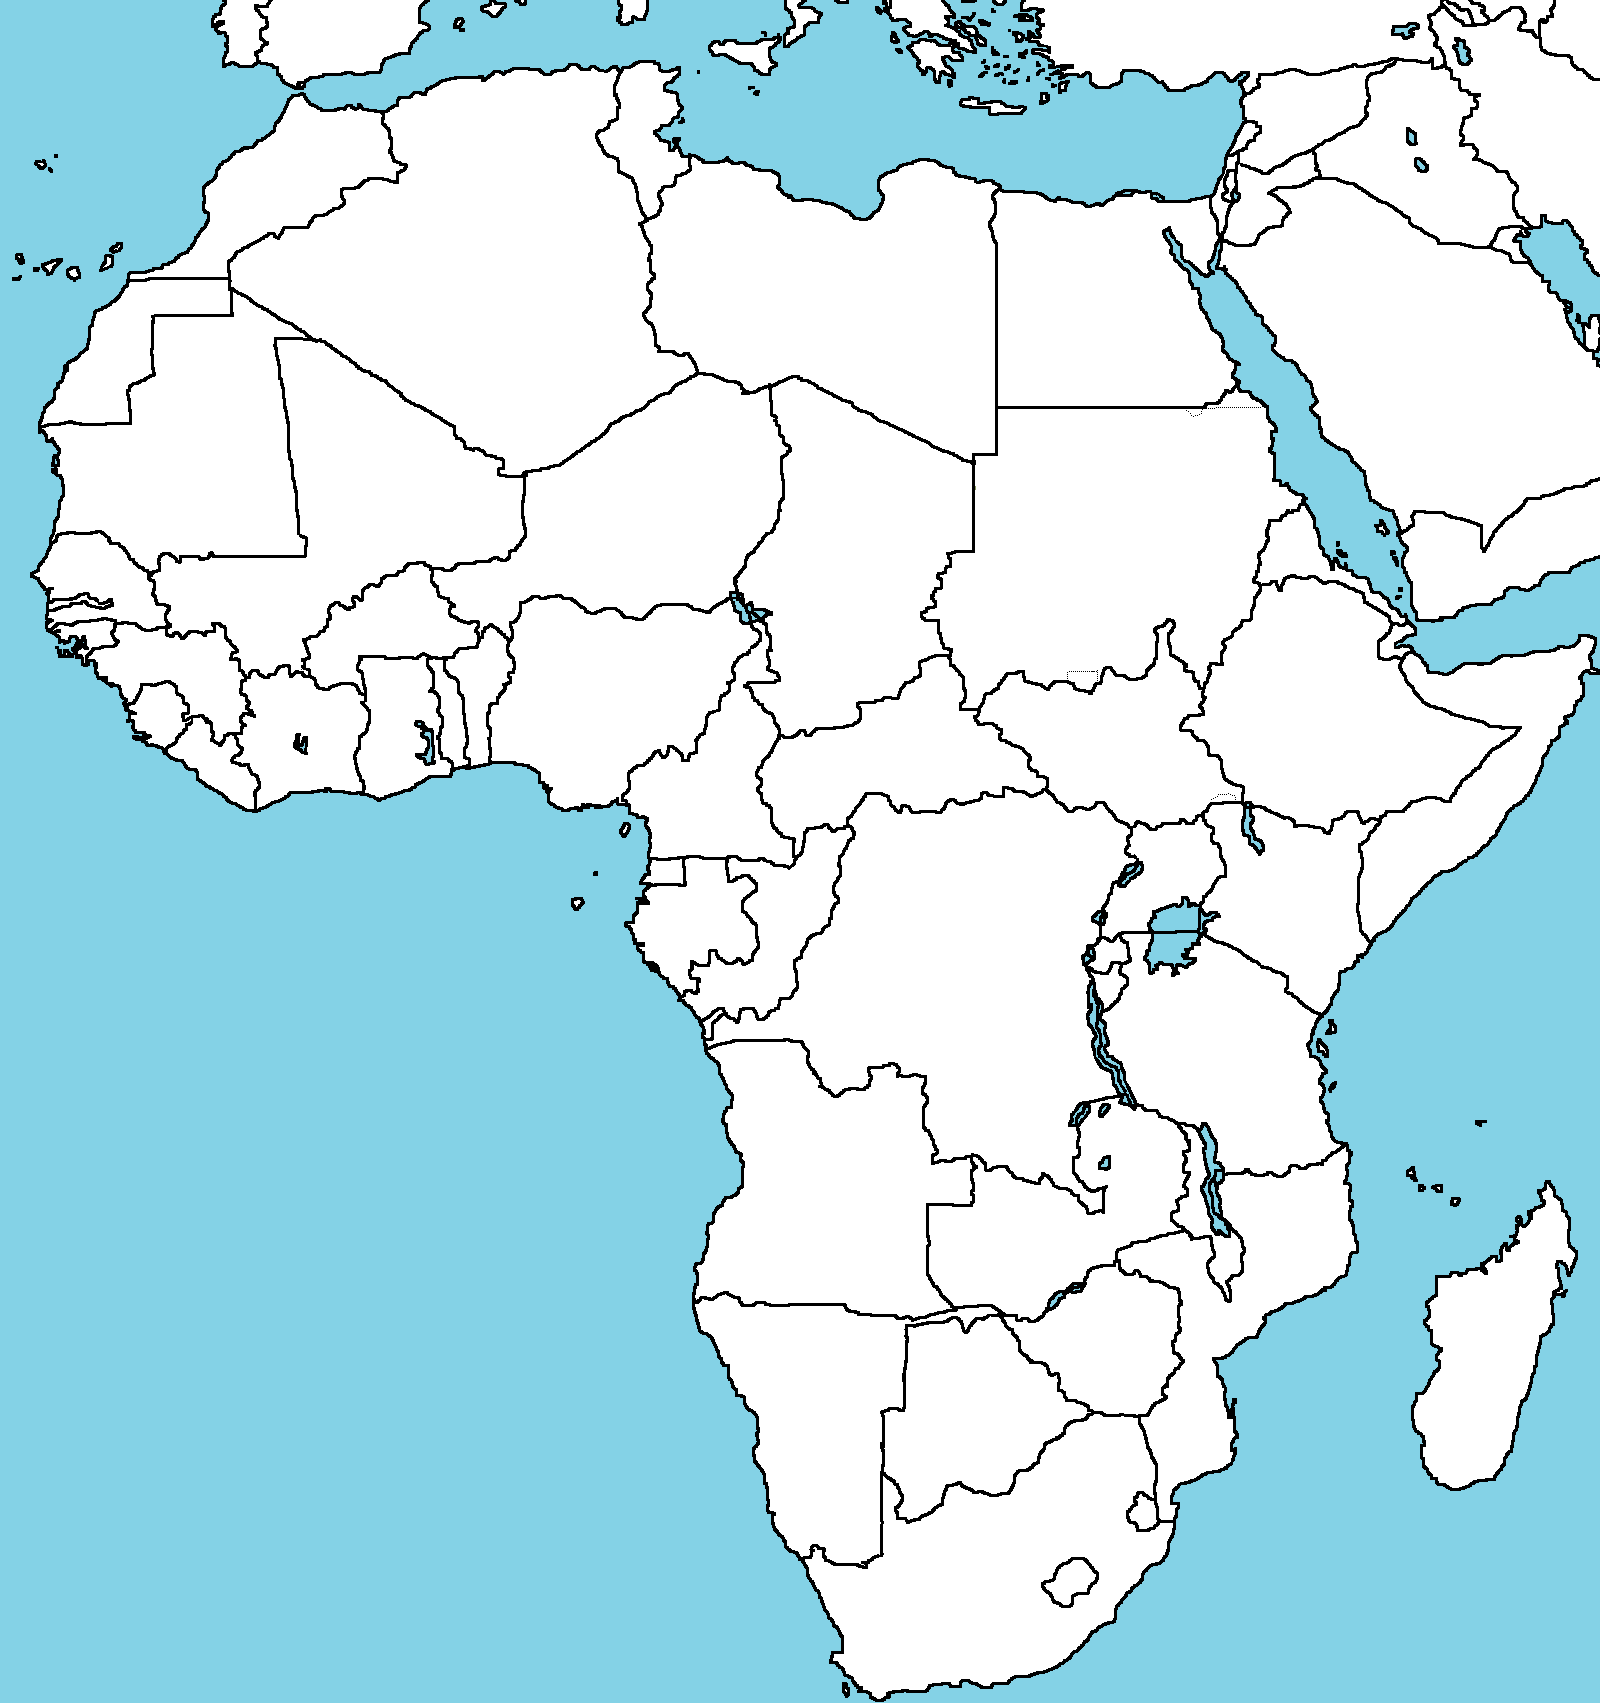 Blank map of Africa by AblDeGaulle45 on DeviantArt